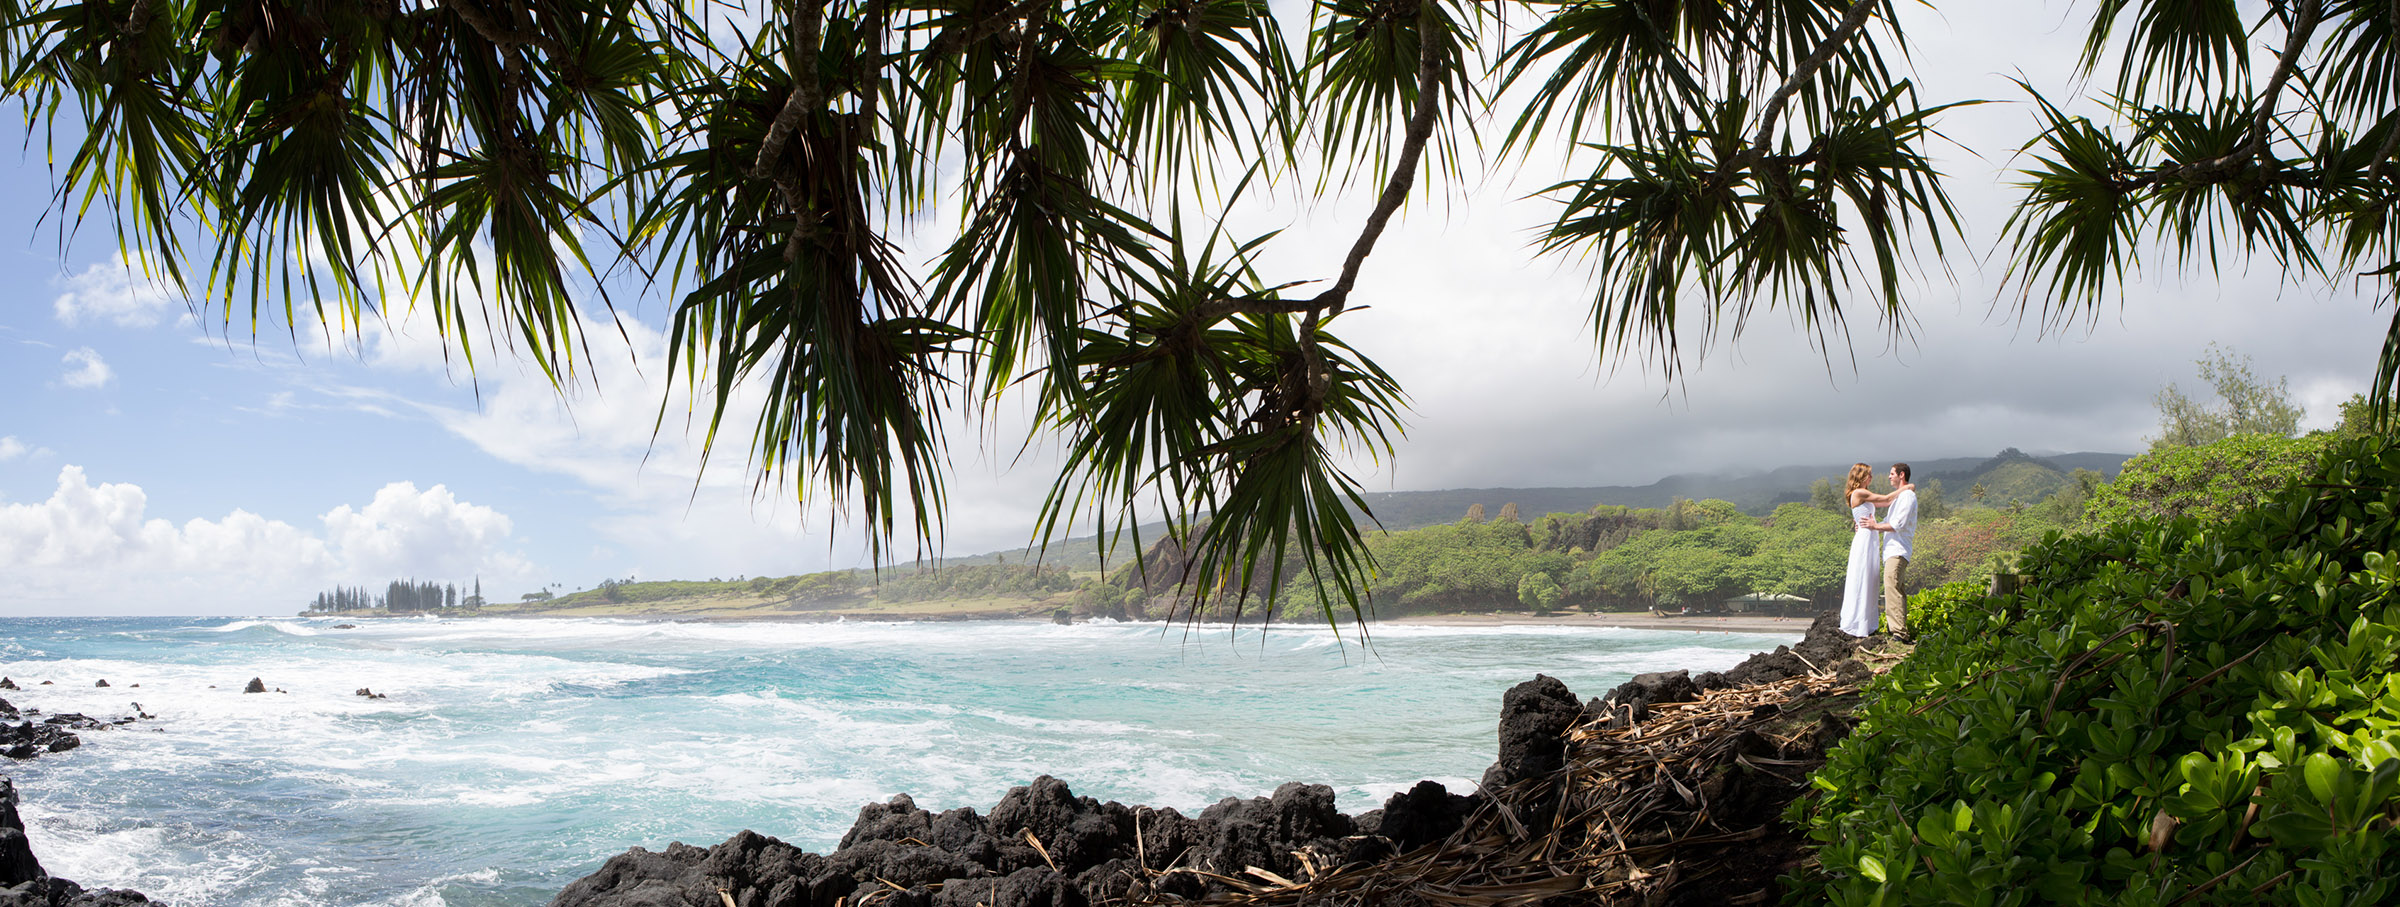 A destination wedding couple hold hands in a panoramic picture at Hamoa Beach in Hana, Hawaii.